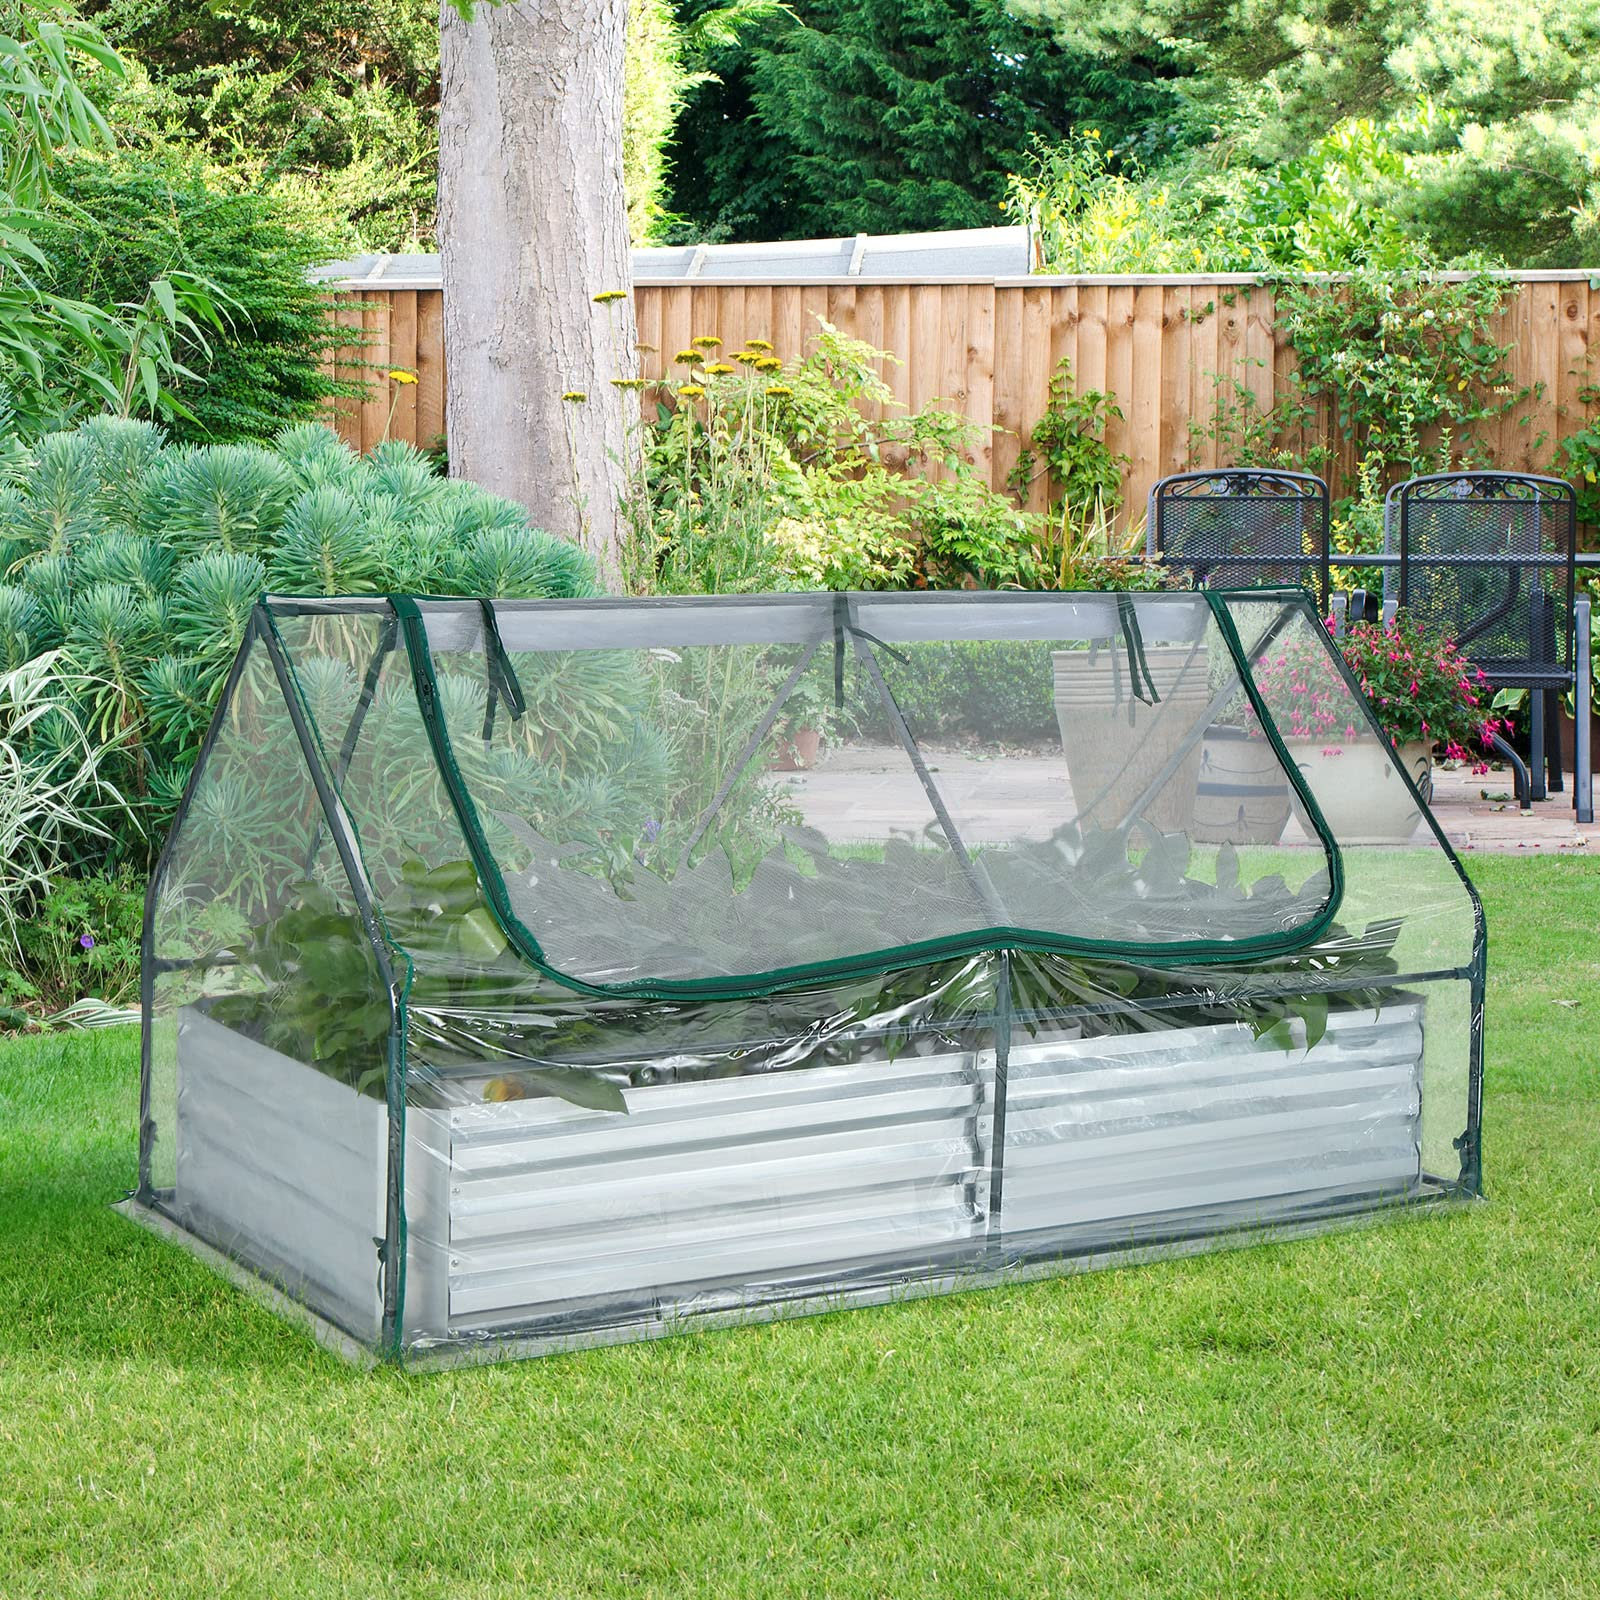 Giantex Galvanized Steel Raised Garden Bed with Mini Greenhouse, Outdoor Metal Planter Box Kit with Large Roll-up PVC Cover